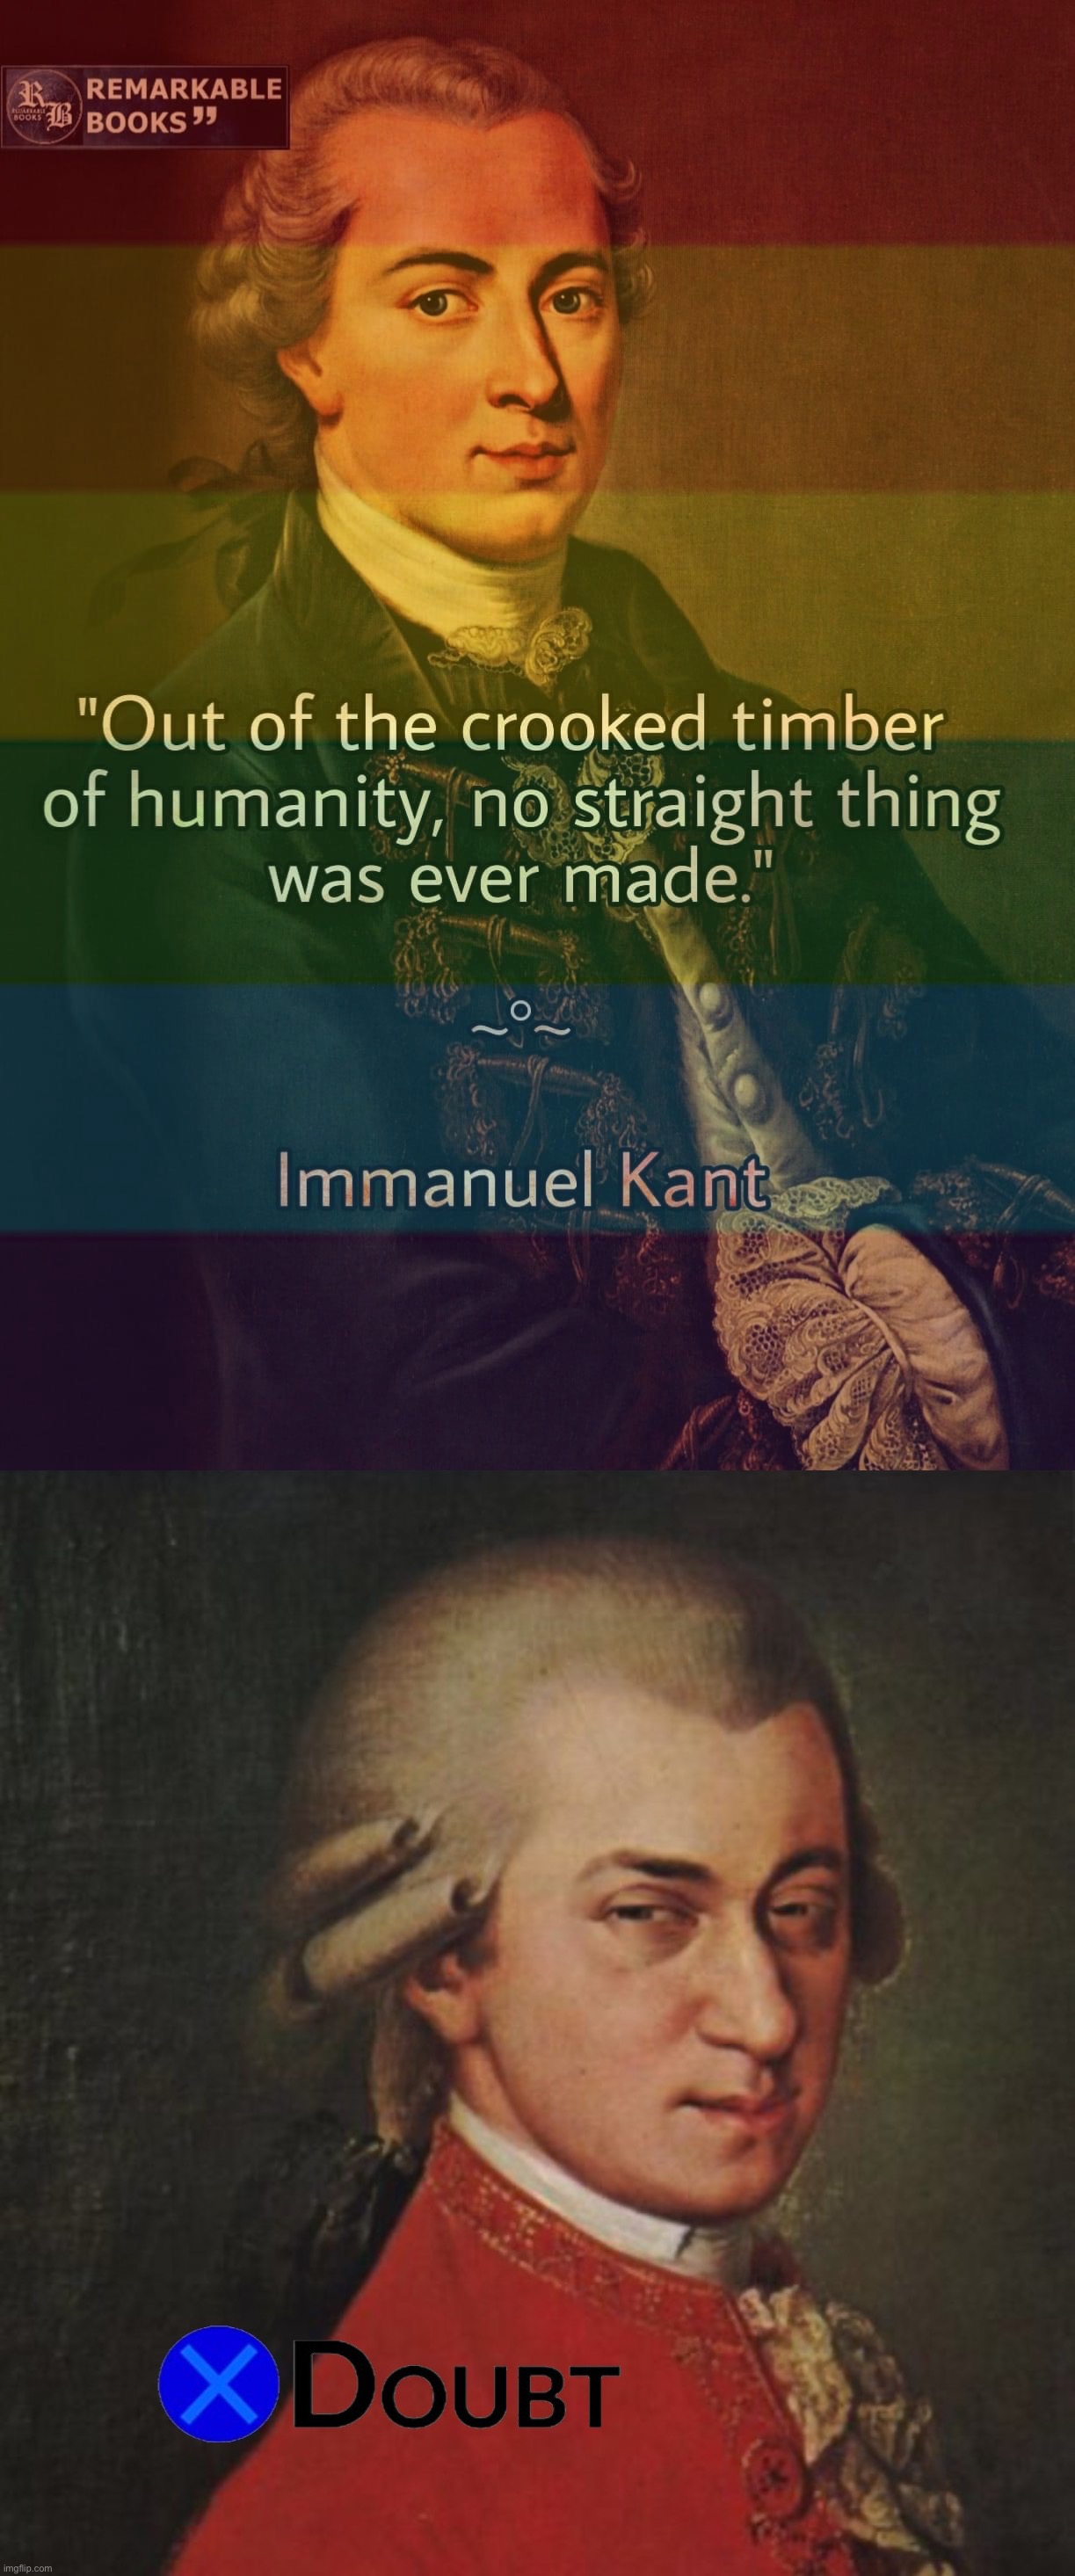 Mozart X doubts Immanuel Kant’s commitment to allyship | image tagged in gay immanuel kant,x doubt mozart,g,a,y,kant | made w/ Imgflip meme maker